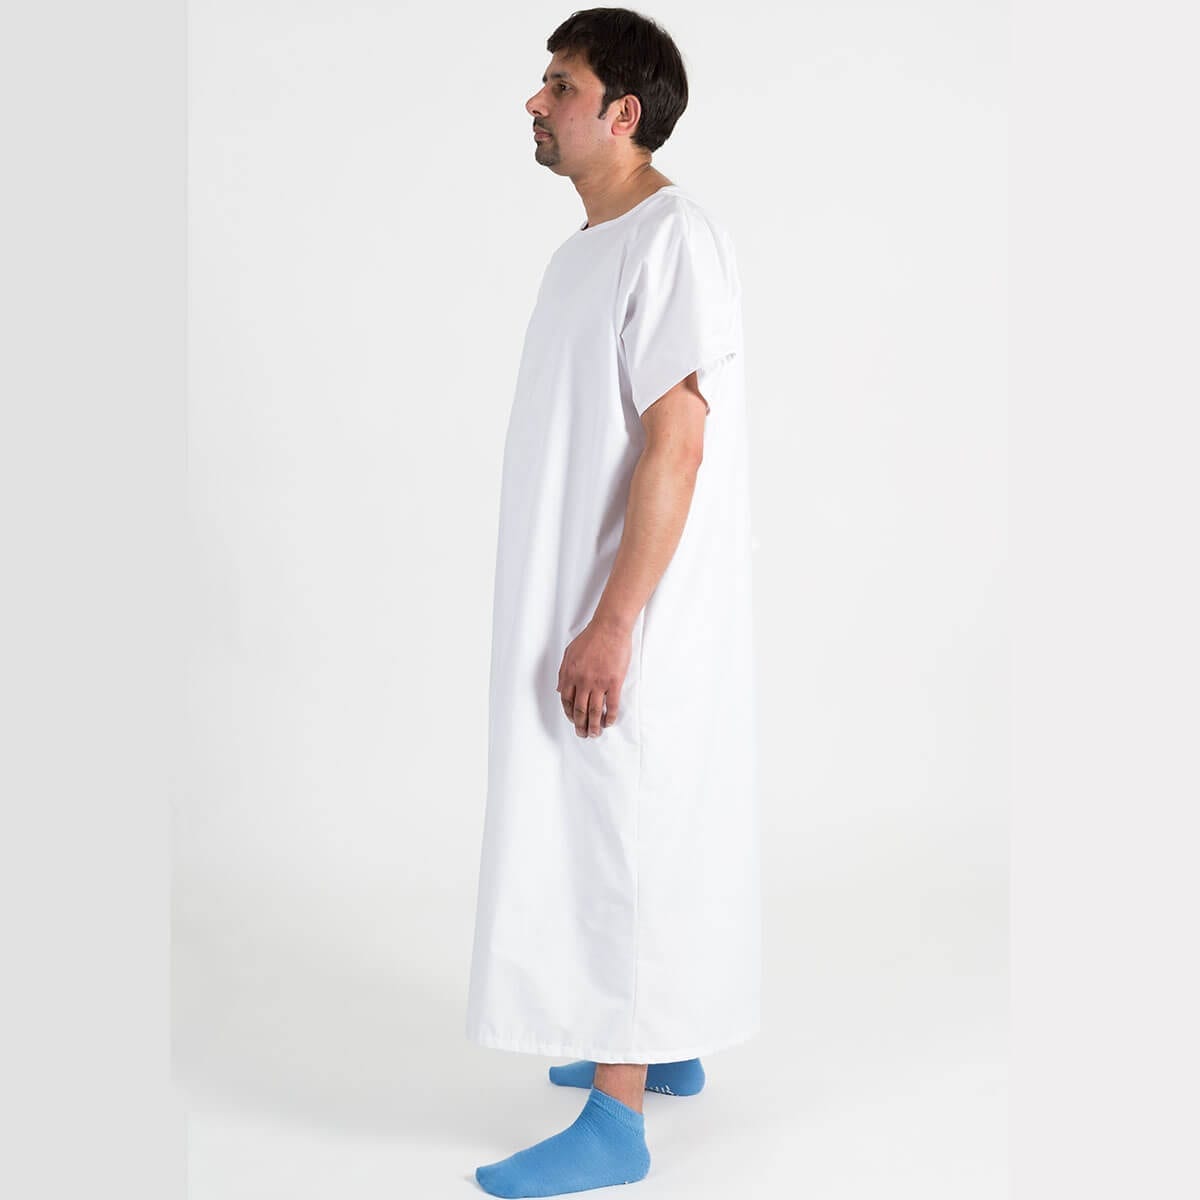 Hospital operation gown - side view